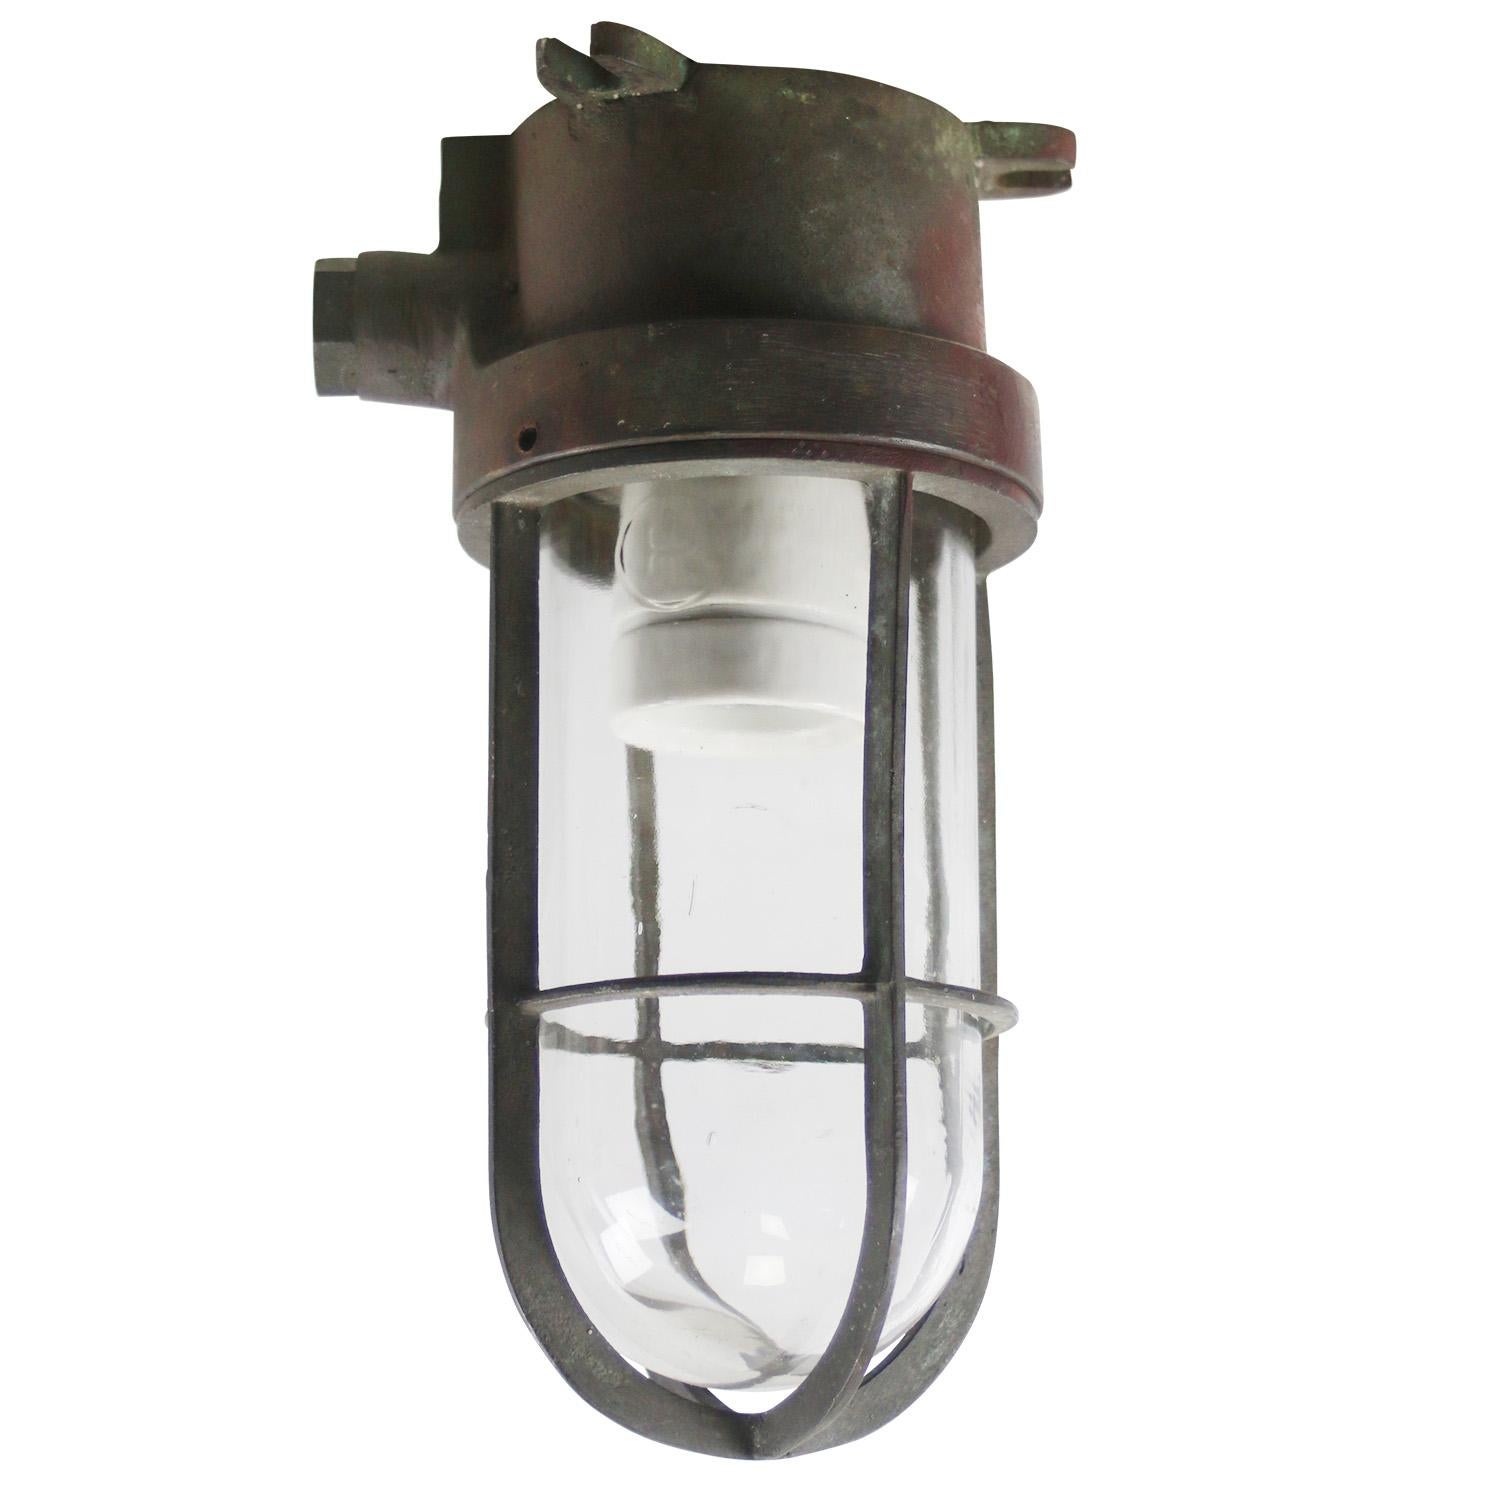 Industria Rotterdam industrial cage light
Copper with clear glass

Weight: 2.40 kg / 5.3 lb

Priced per individual item. All lamps have been made suitable by international standards for incandescent light bulbs, energy-efficient and LED bulbs.